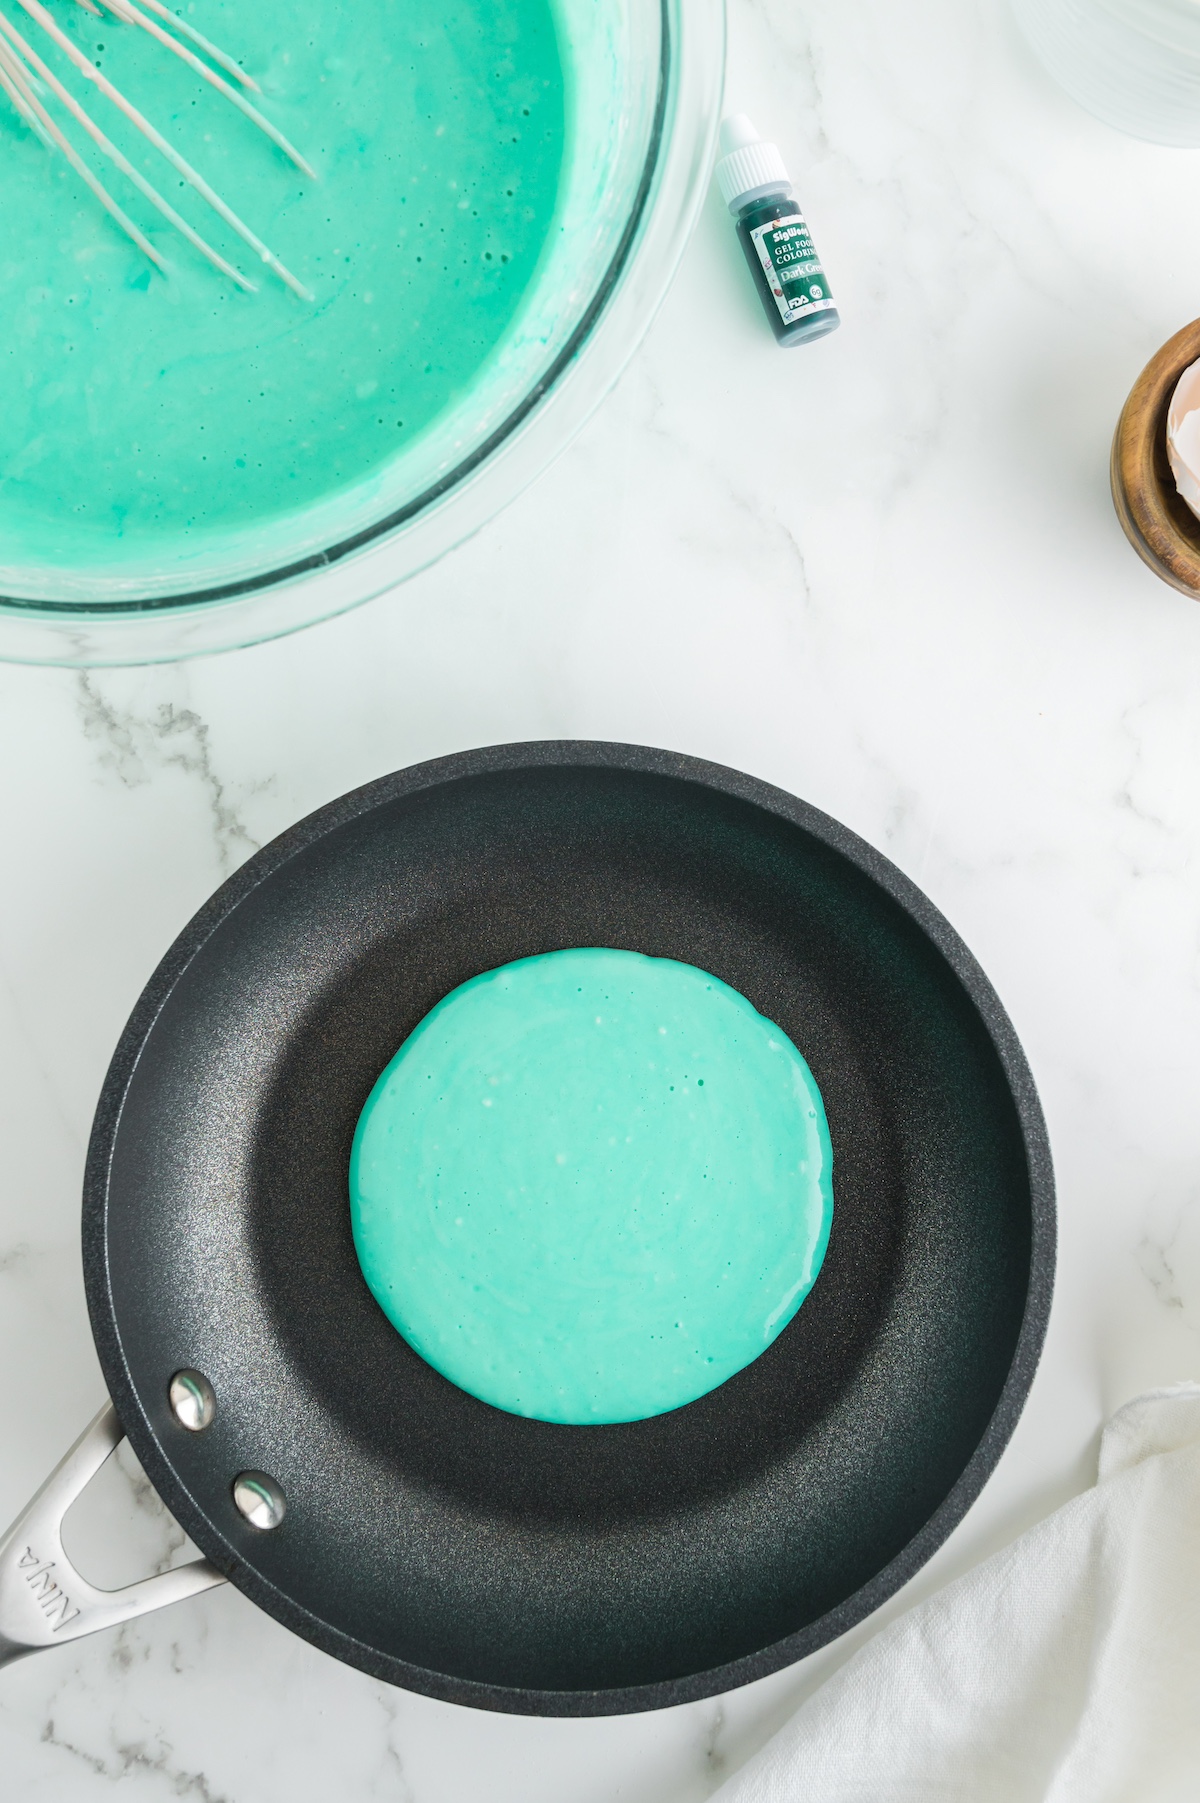 Green batter cooking in a pan